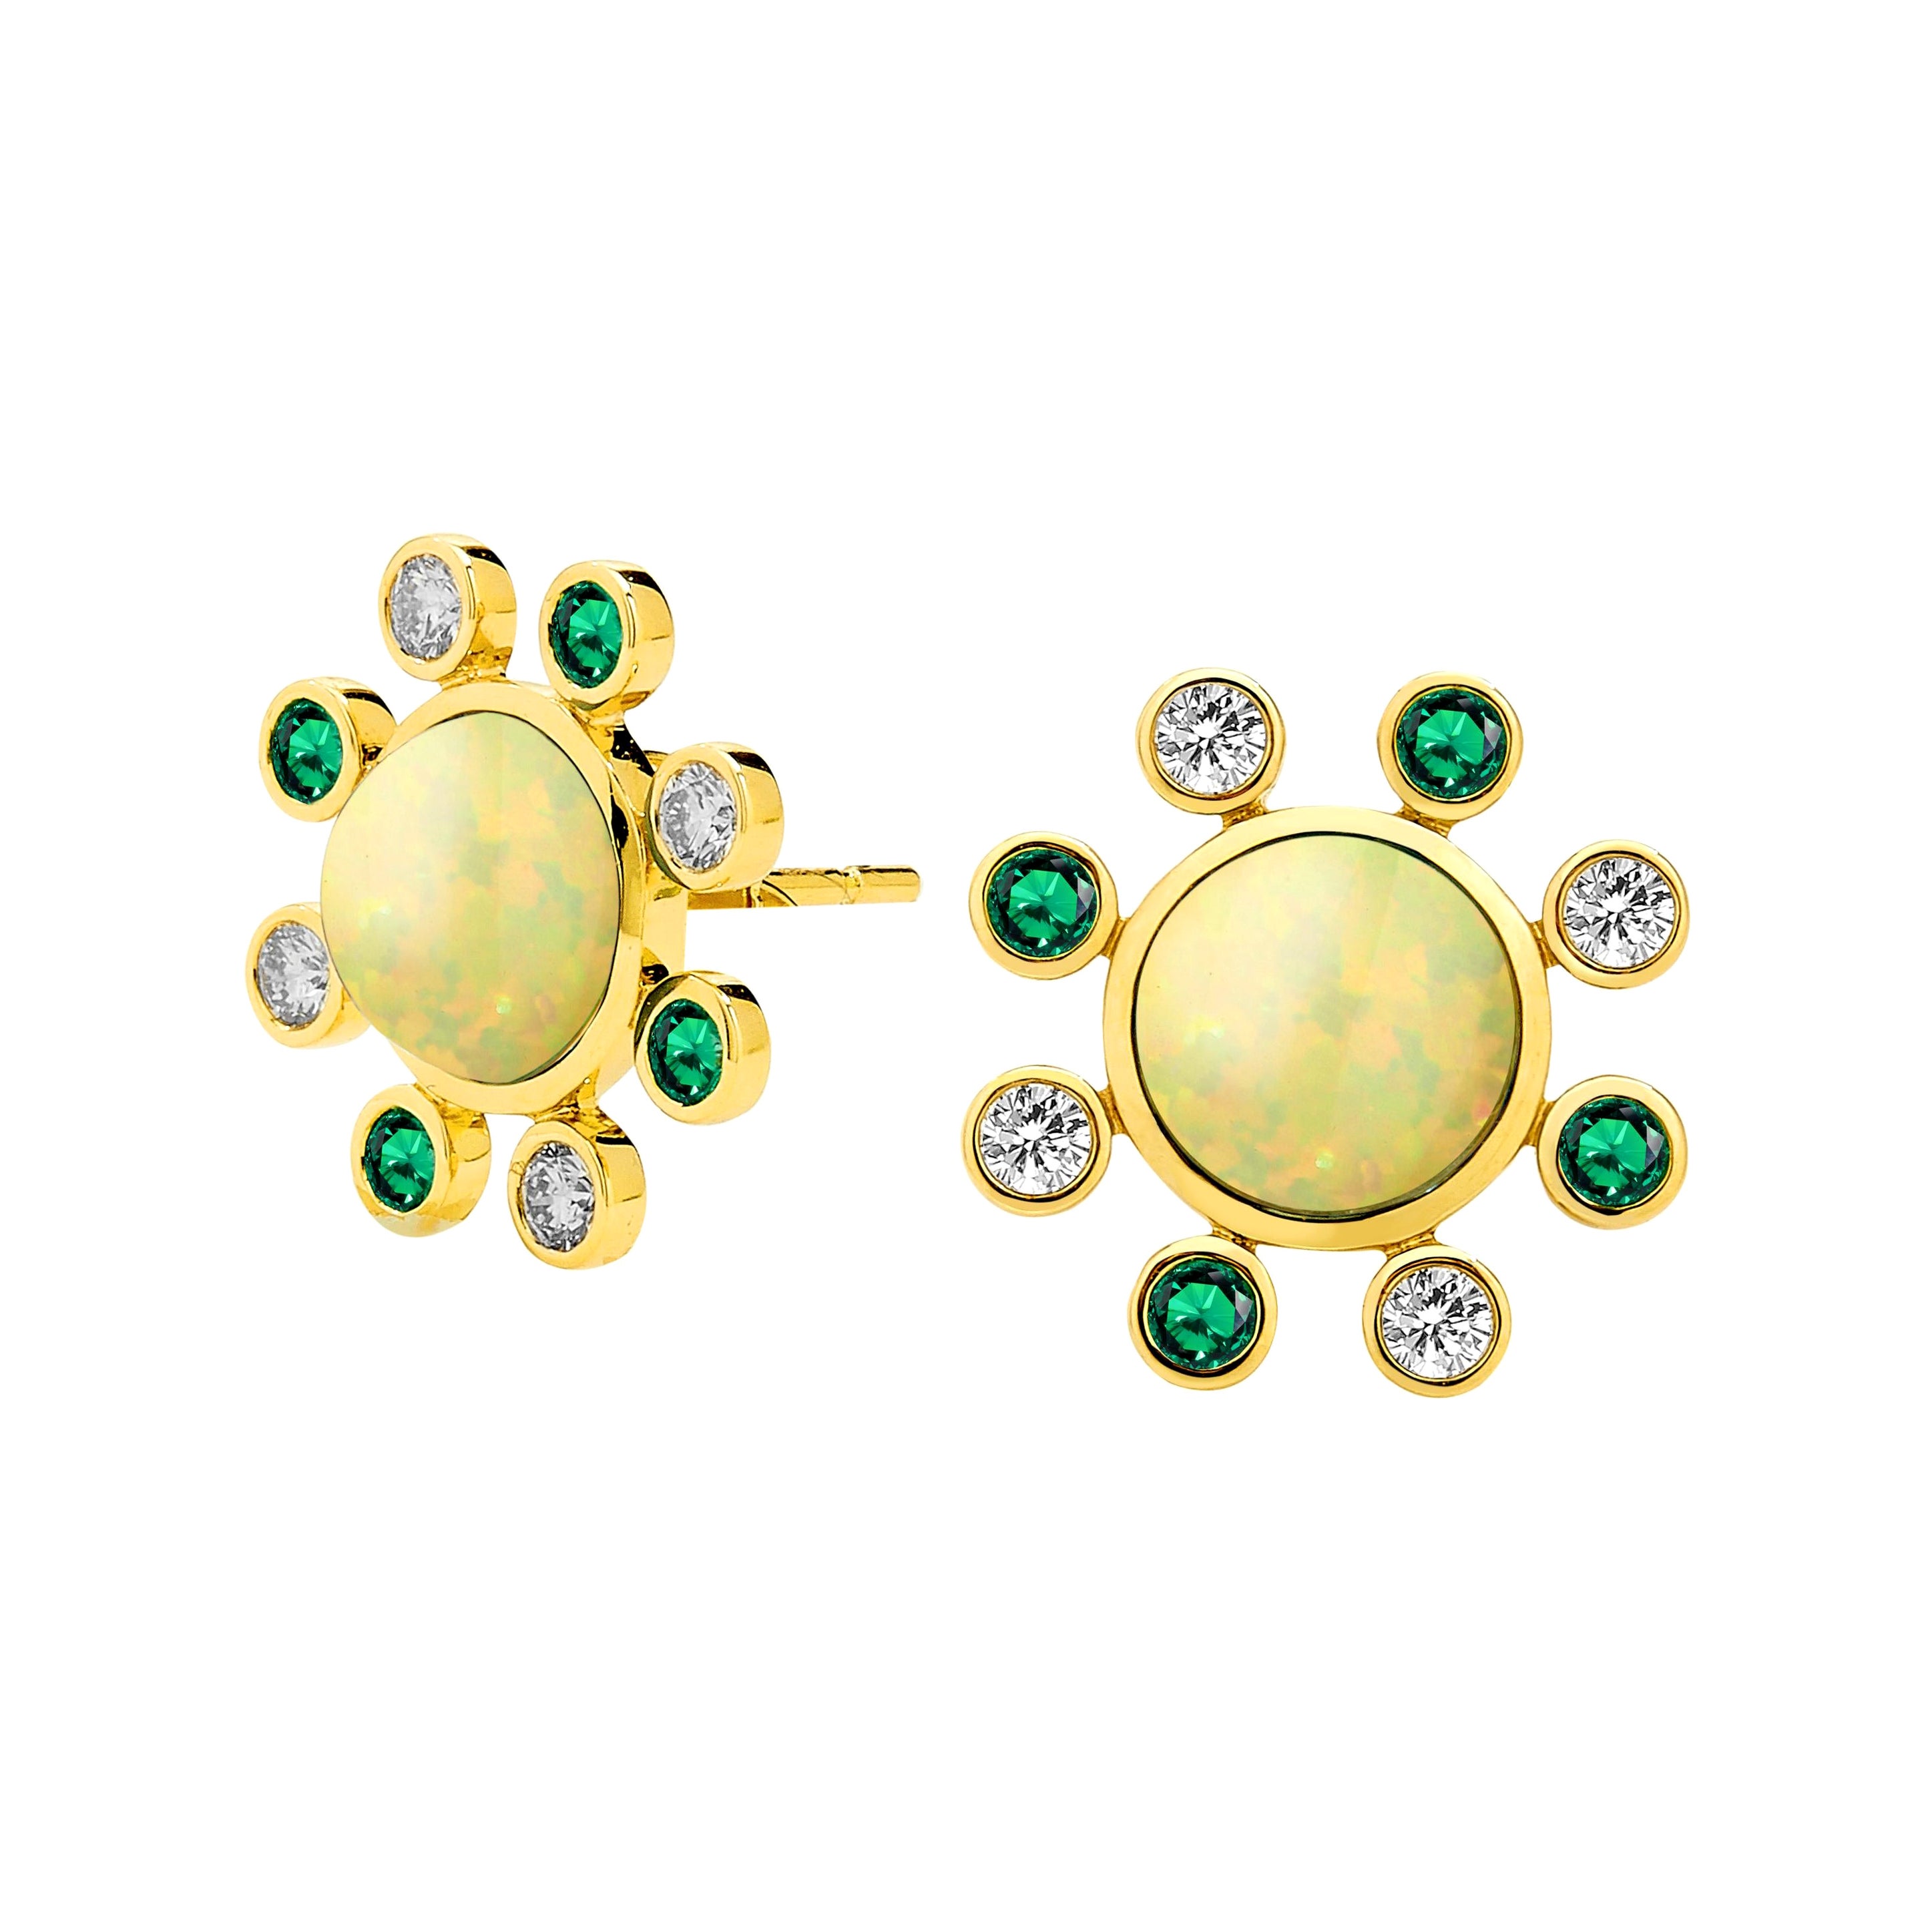 Syna Opal Yellow Gold Earrings with Emeralds and Diamonds